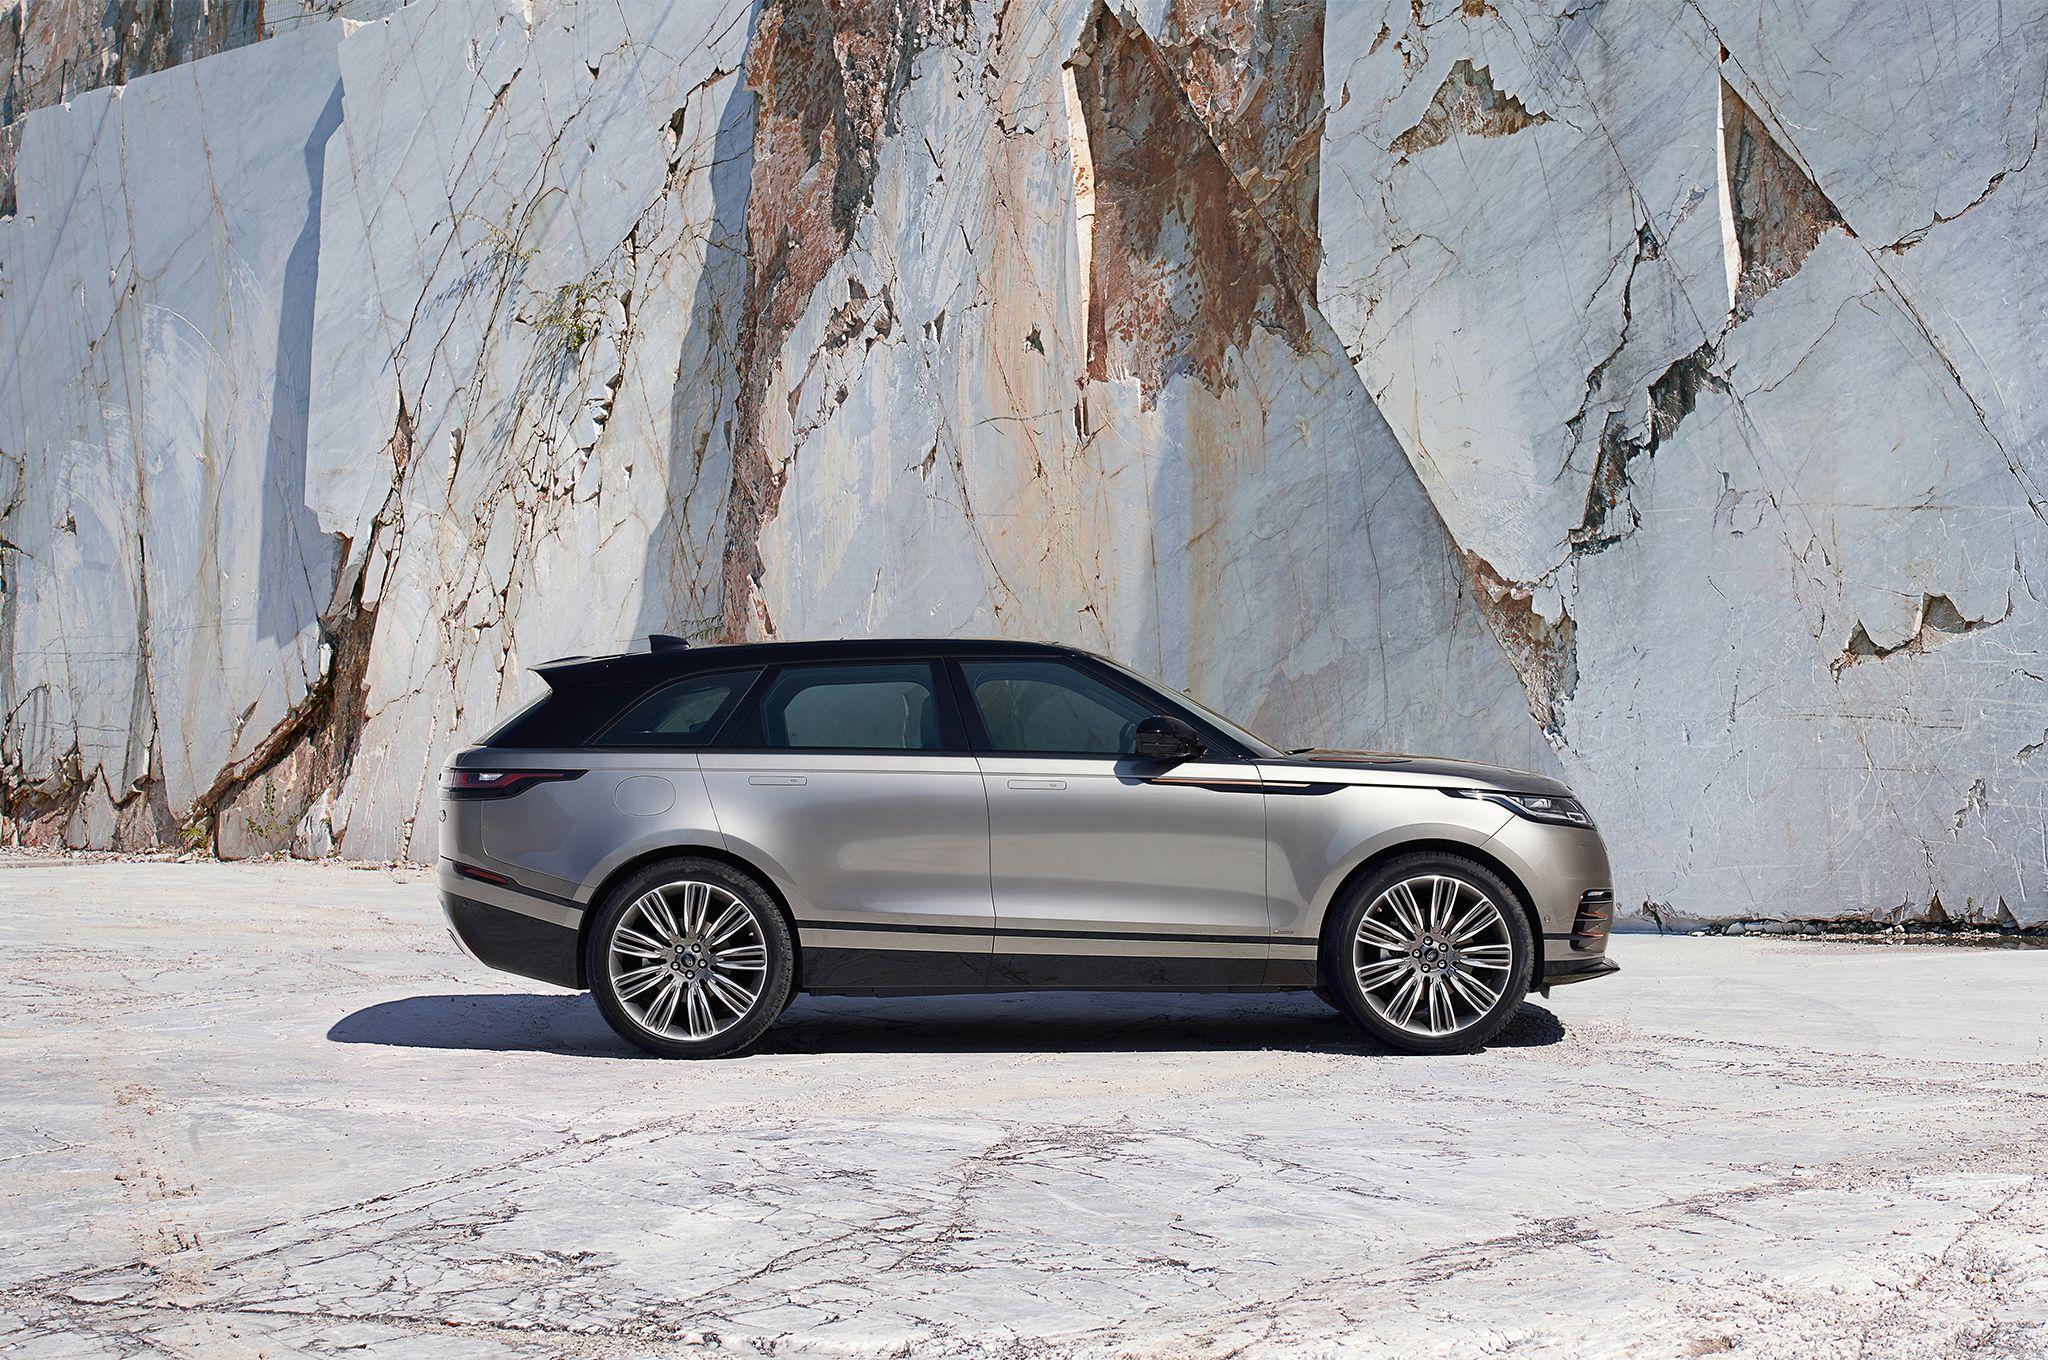 Styling Size Up: 2018 Range Rover Velar Vs. The Competition